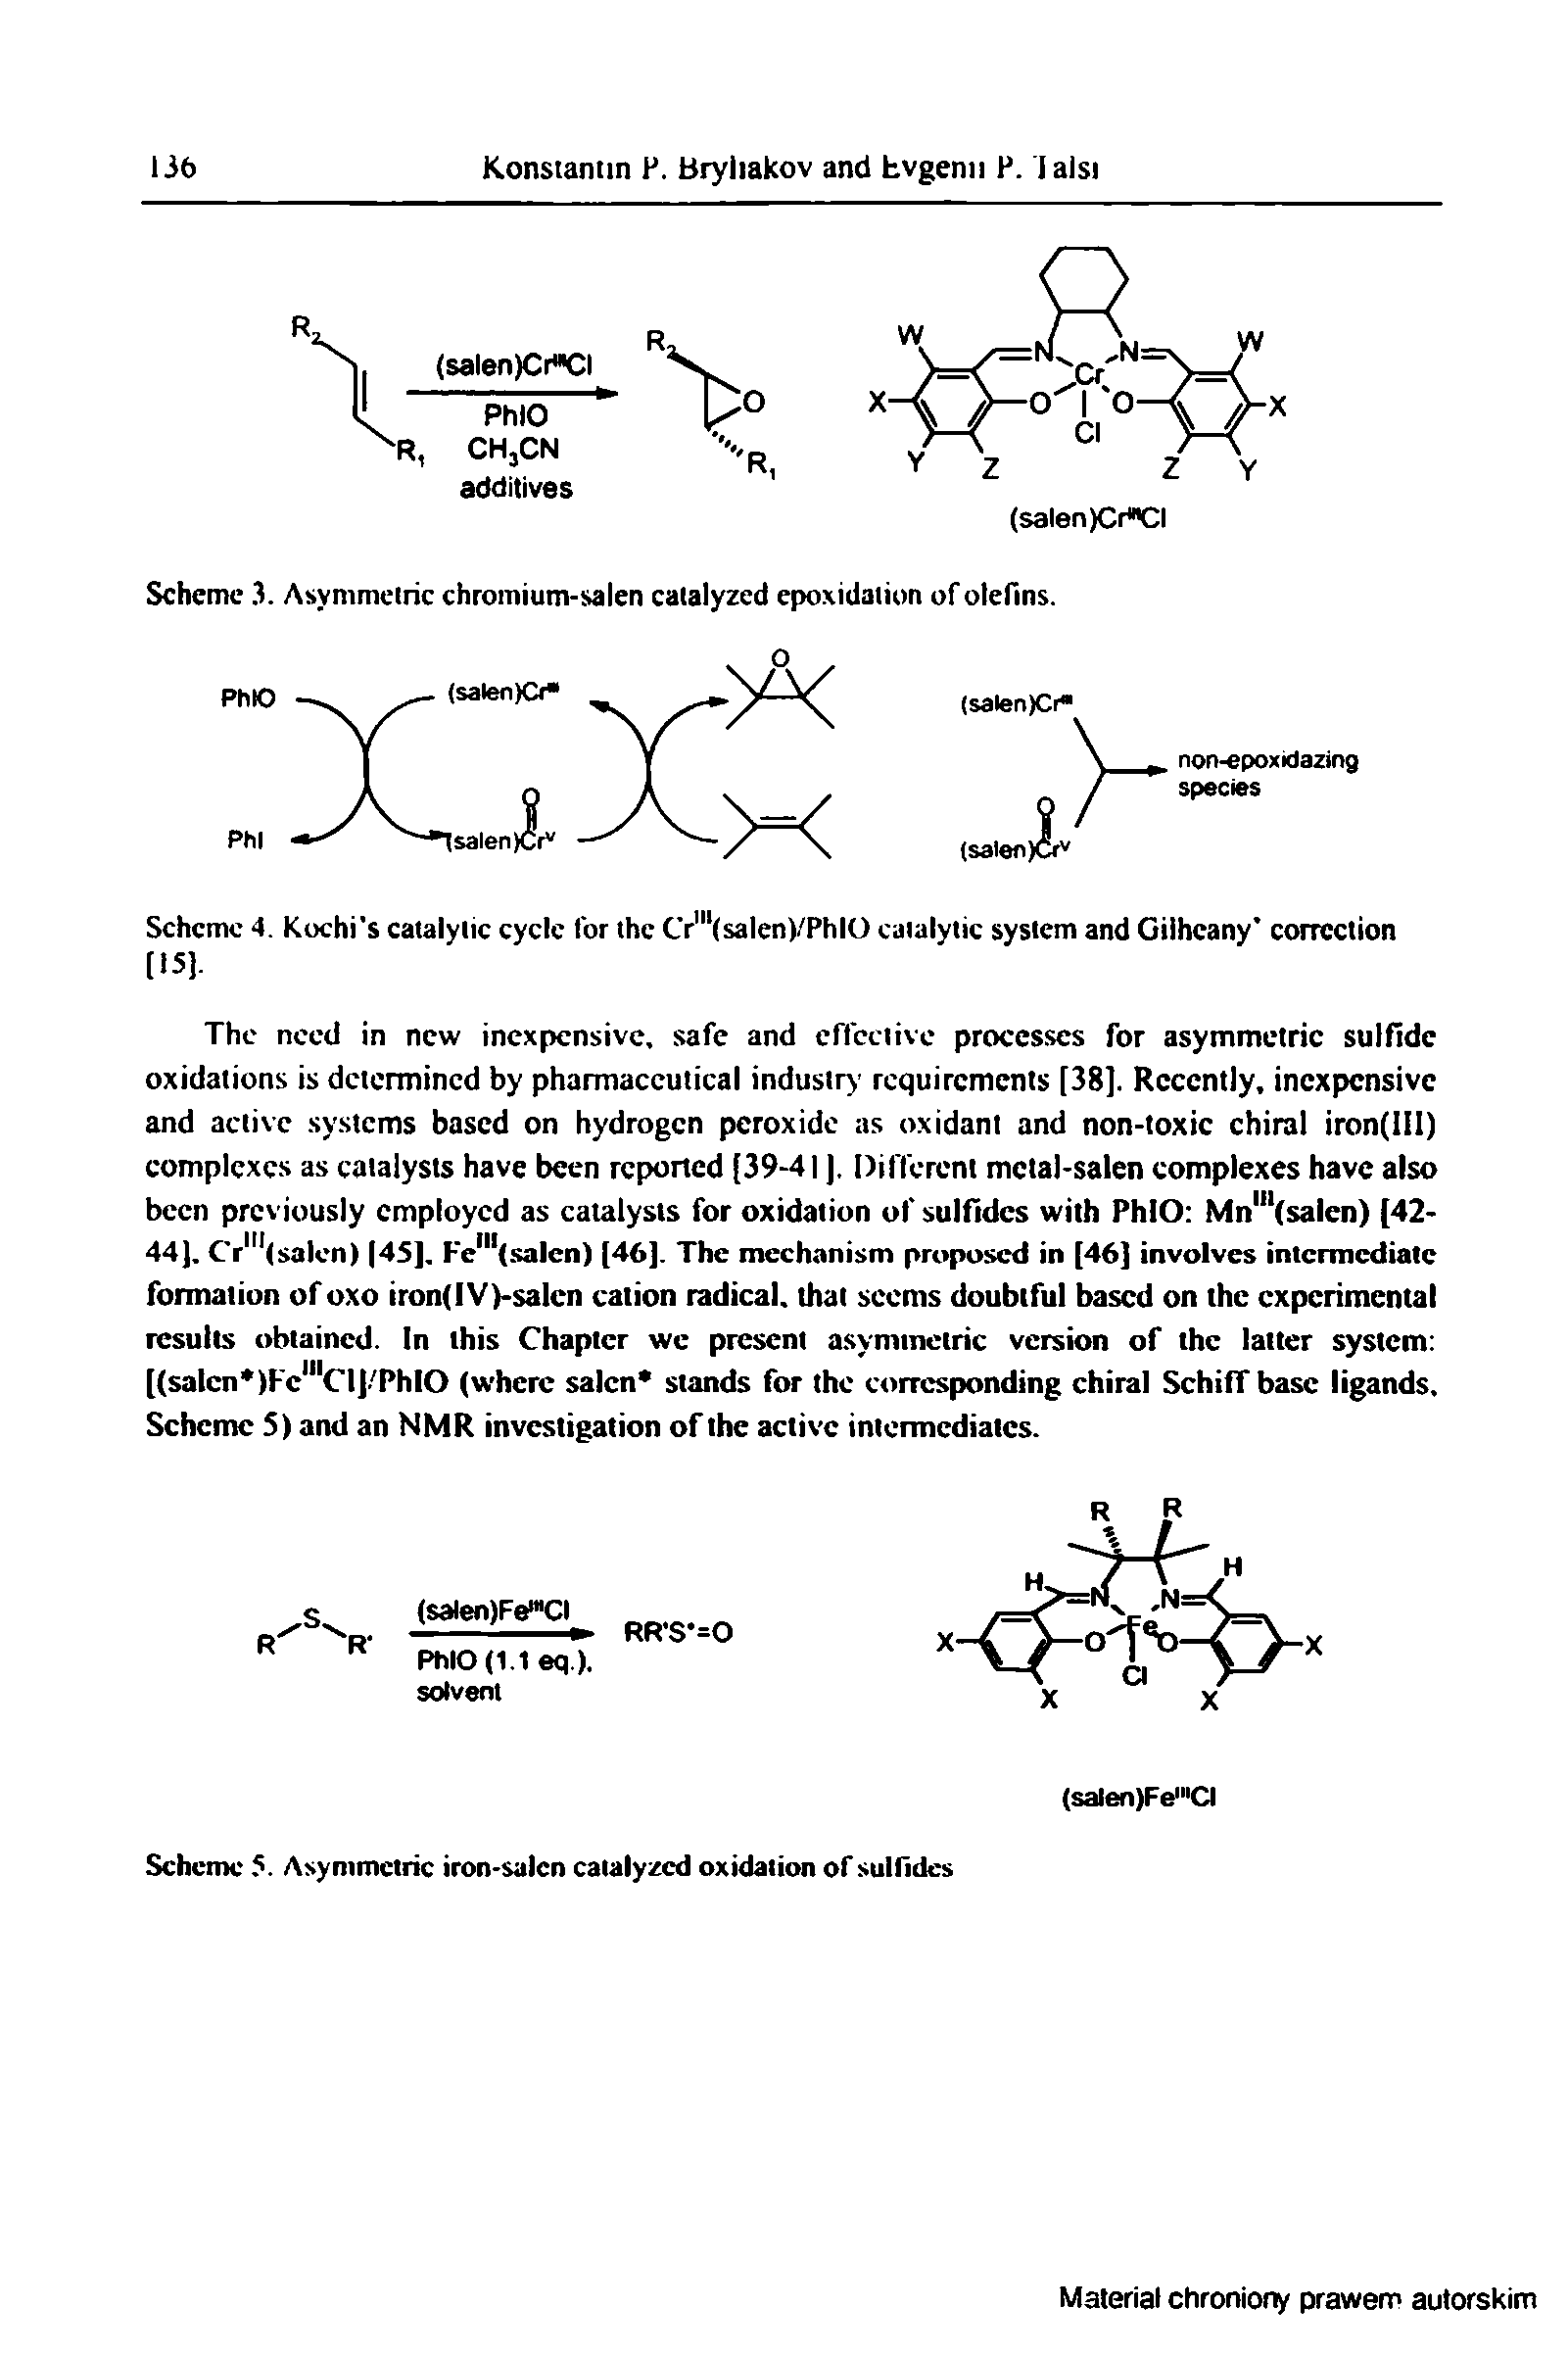 Scheme 4. Kochi s catalytic cycle for the Cr" (salen)/PhlO catalytic system and Giiheany correction [15].